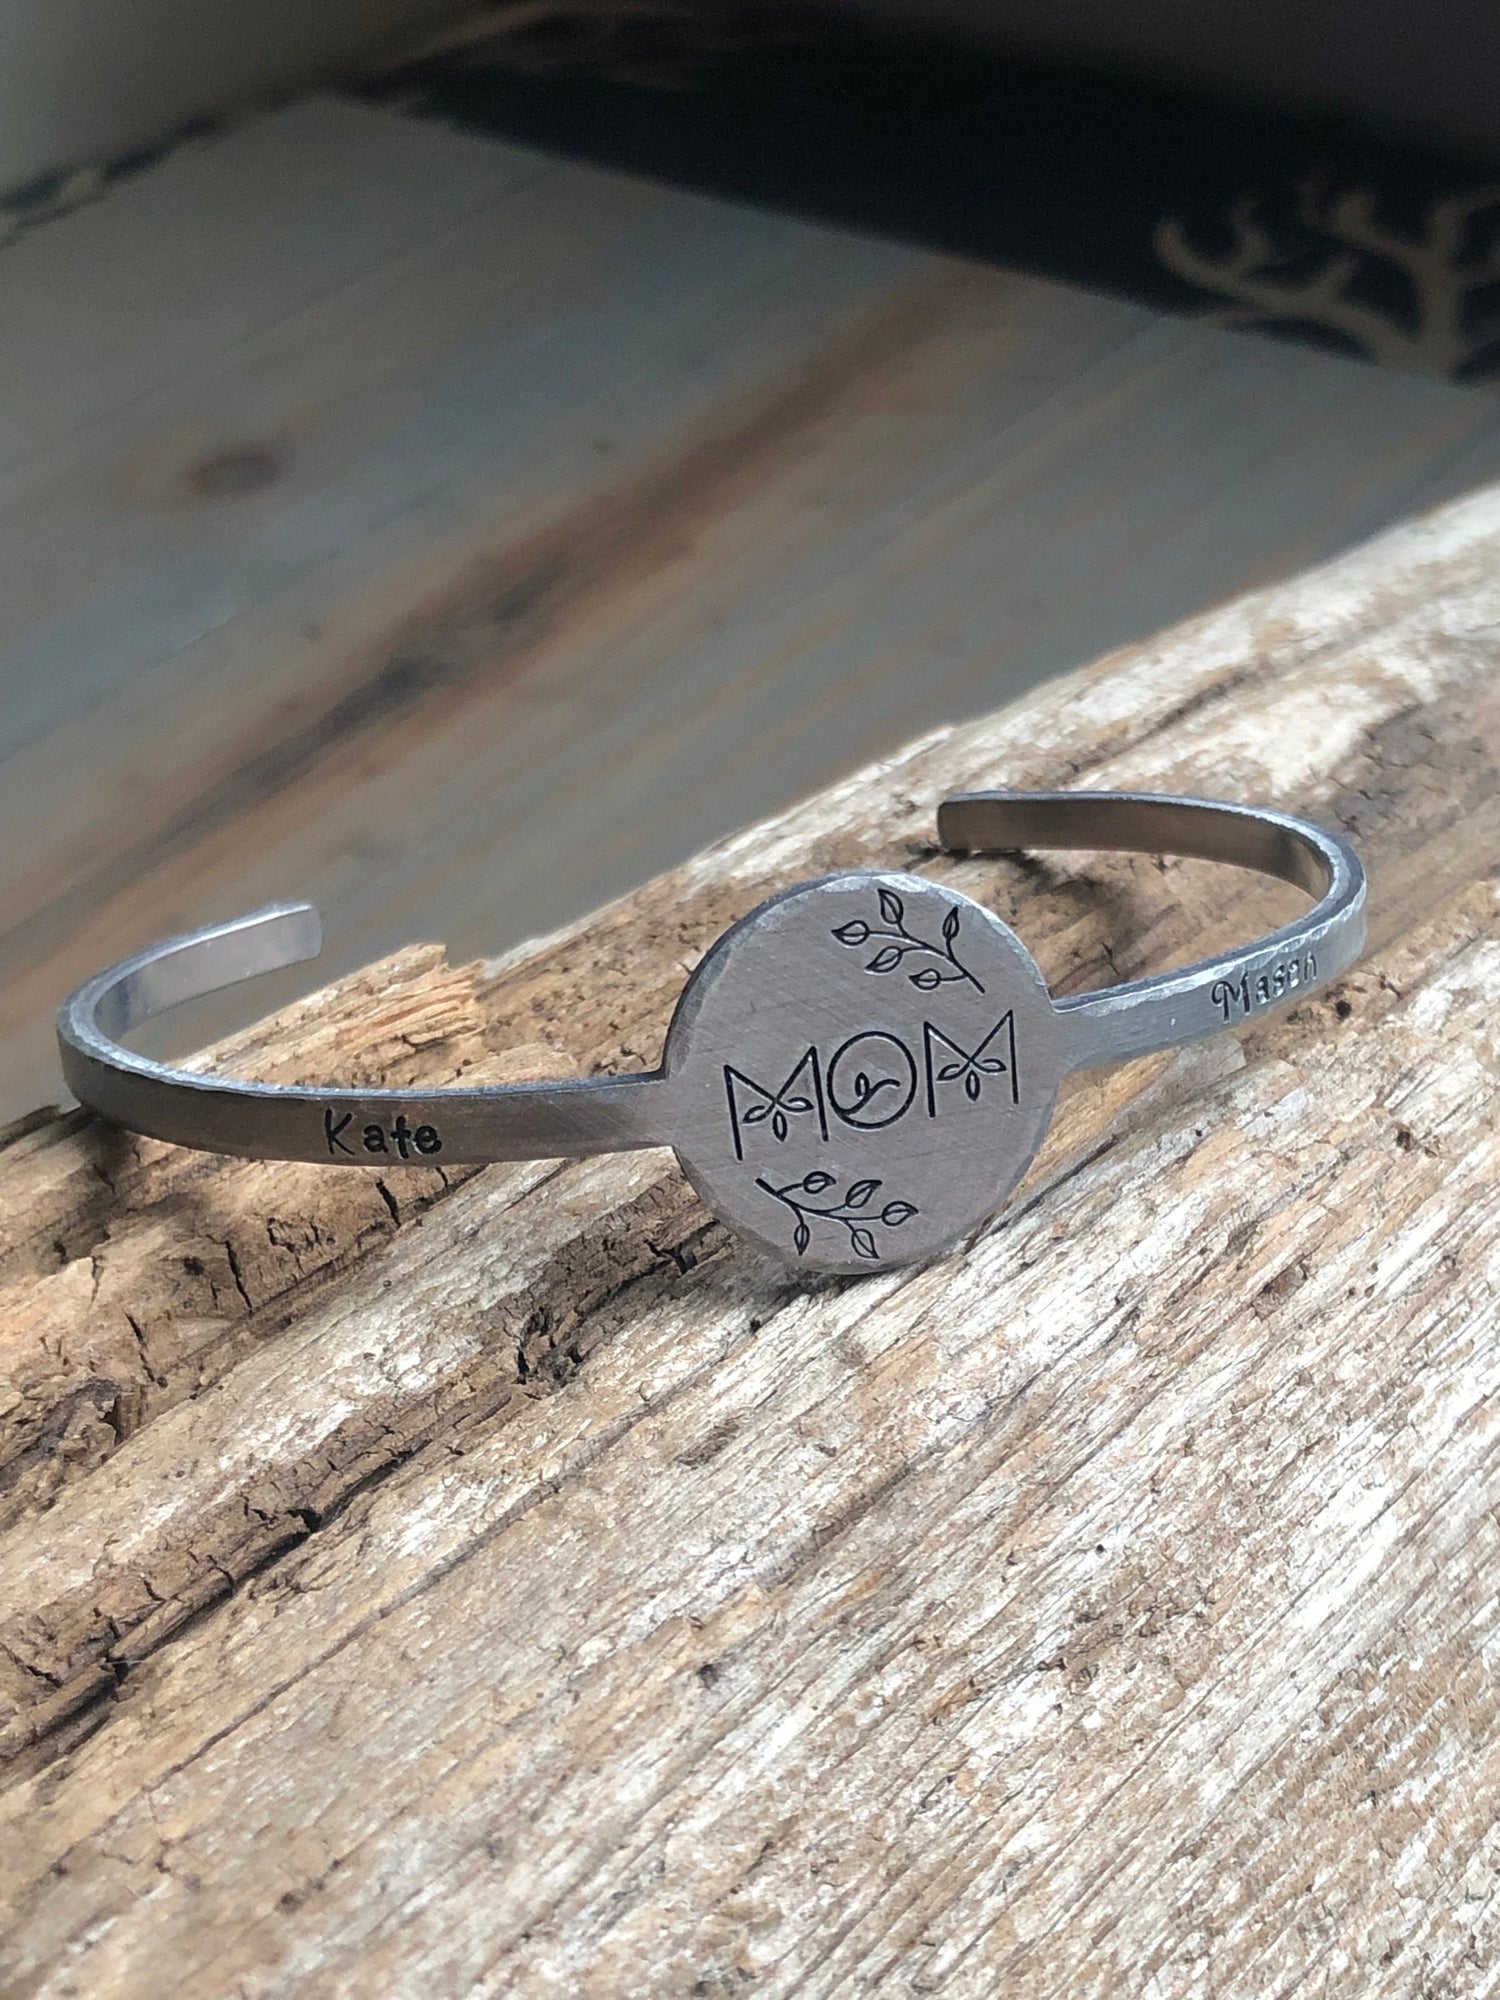 Bracelet for Mom, Mother's Day Gift, Bangle Cuff Bracelet, Gift for Wife, Bracelet with Children's Names, Personalized Bracelet for Grandma